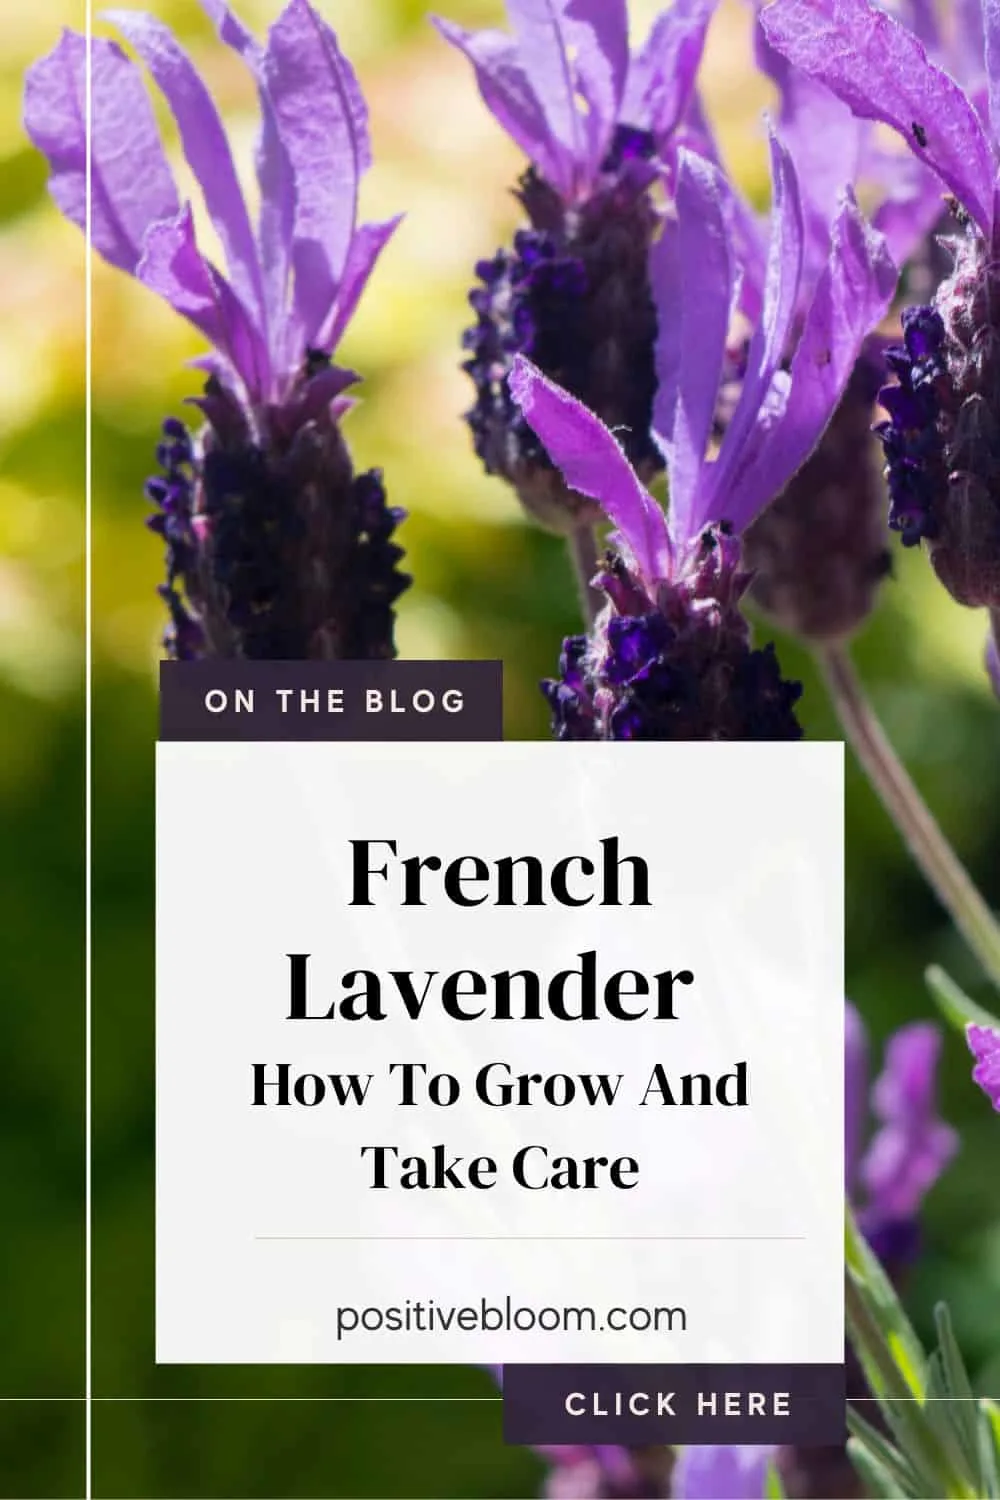 How To Grow And Take Care Of French Lavender Pinterest